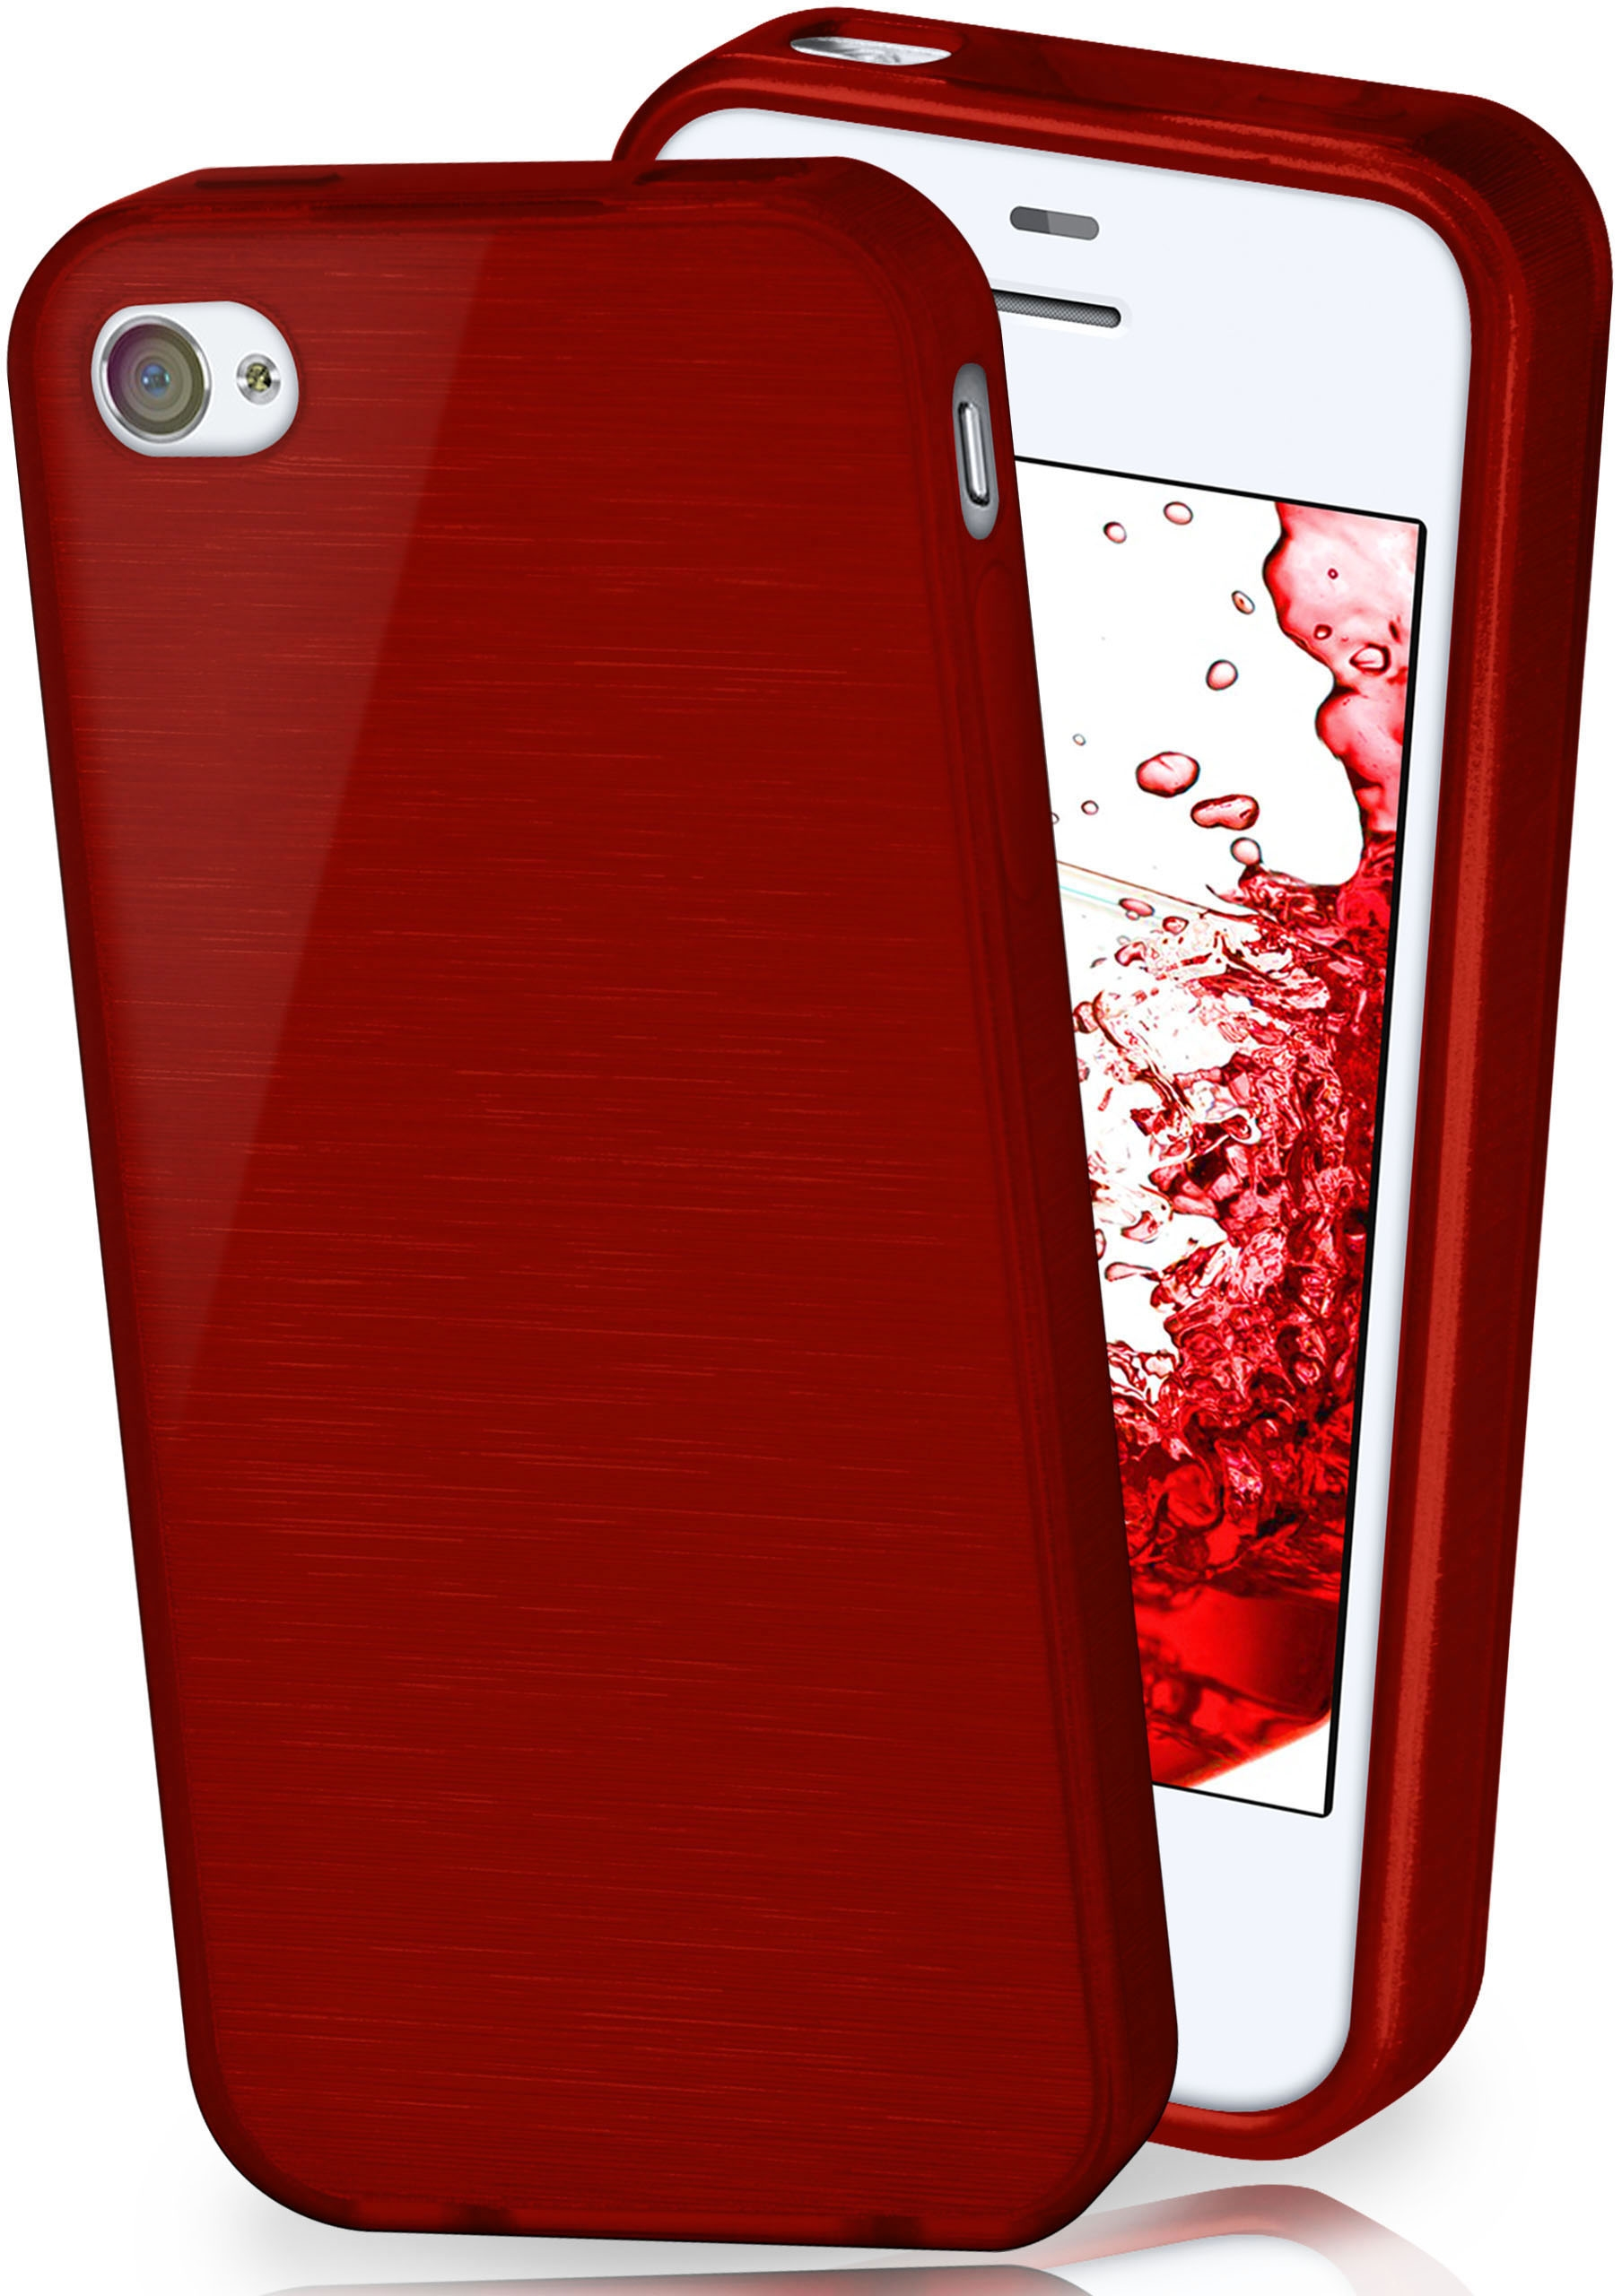 MOEX Brushed Apple, Backcover, / iPhone 4s iPhone 4, Crimson-Red Case